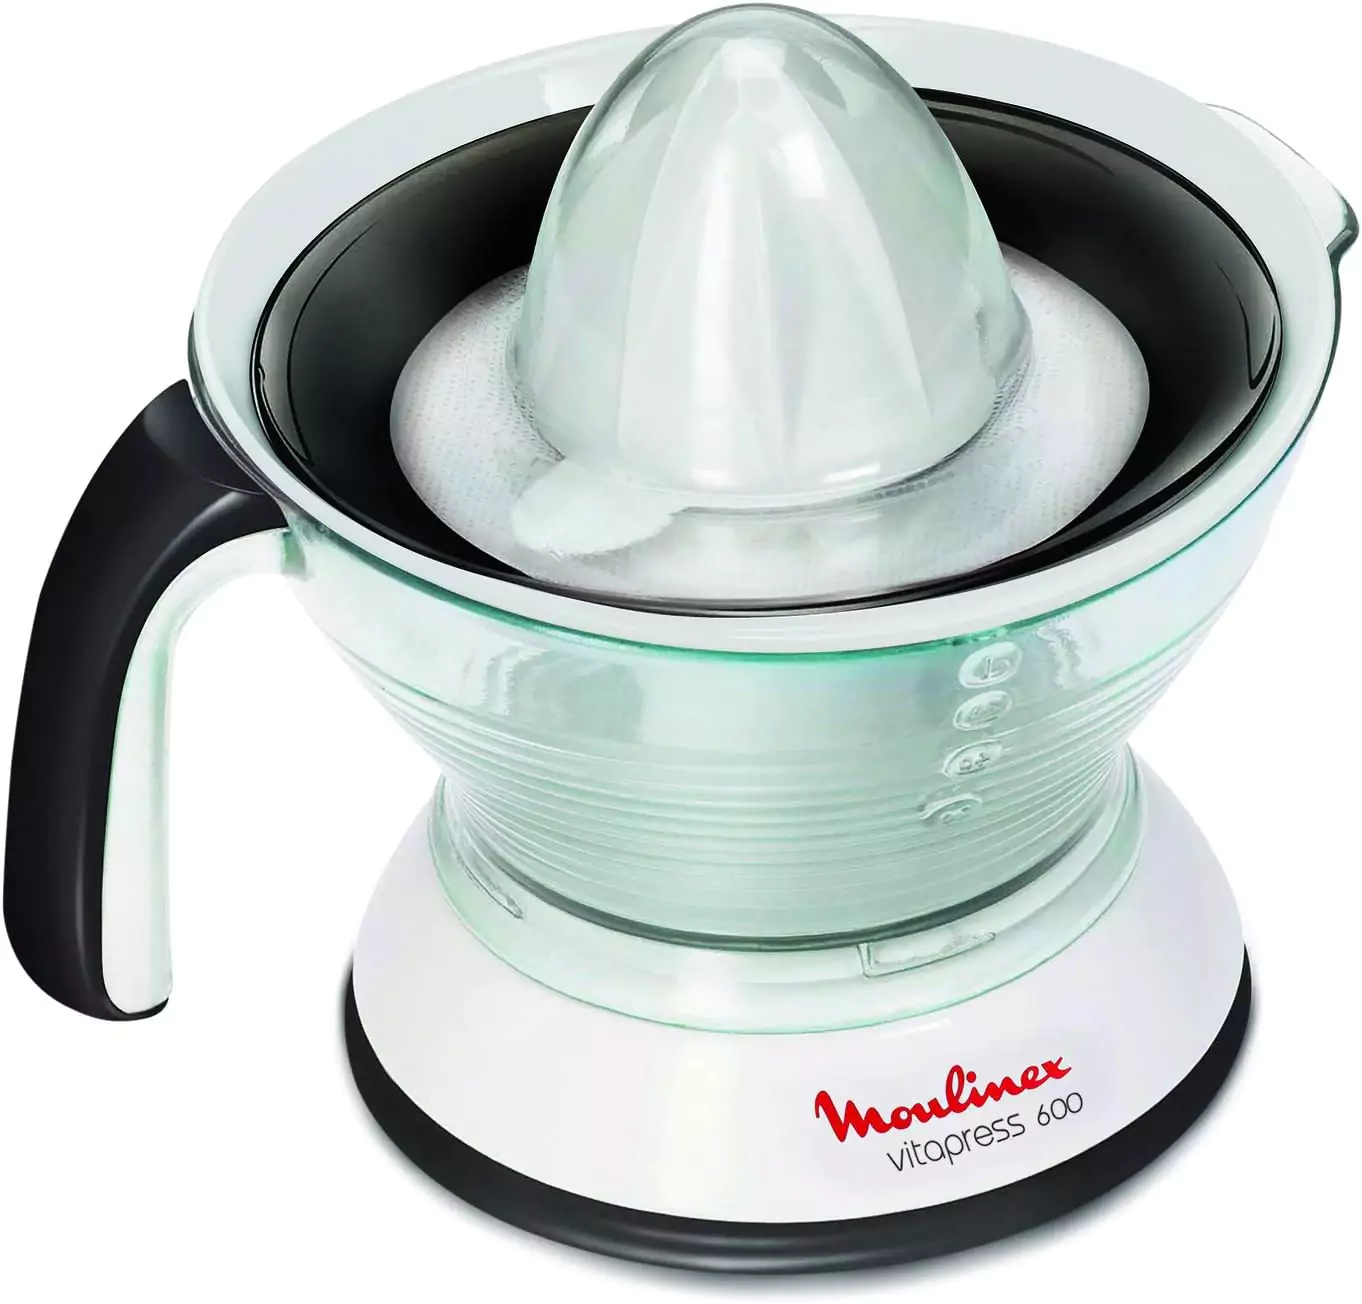 Moulinex plastic manual juicer with capacity of 0.6 liters, transparent color - model number PC300B27